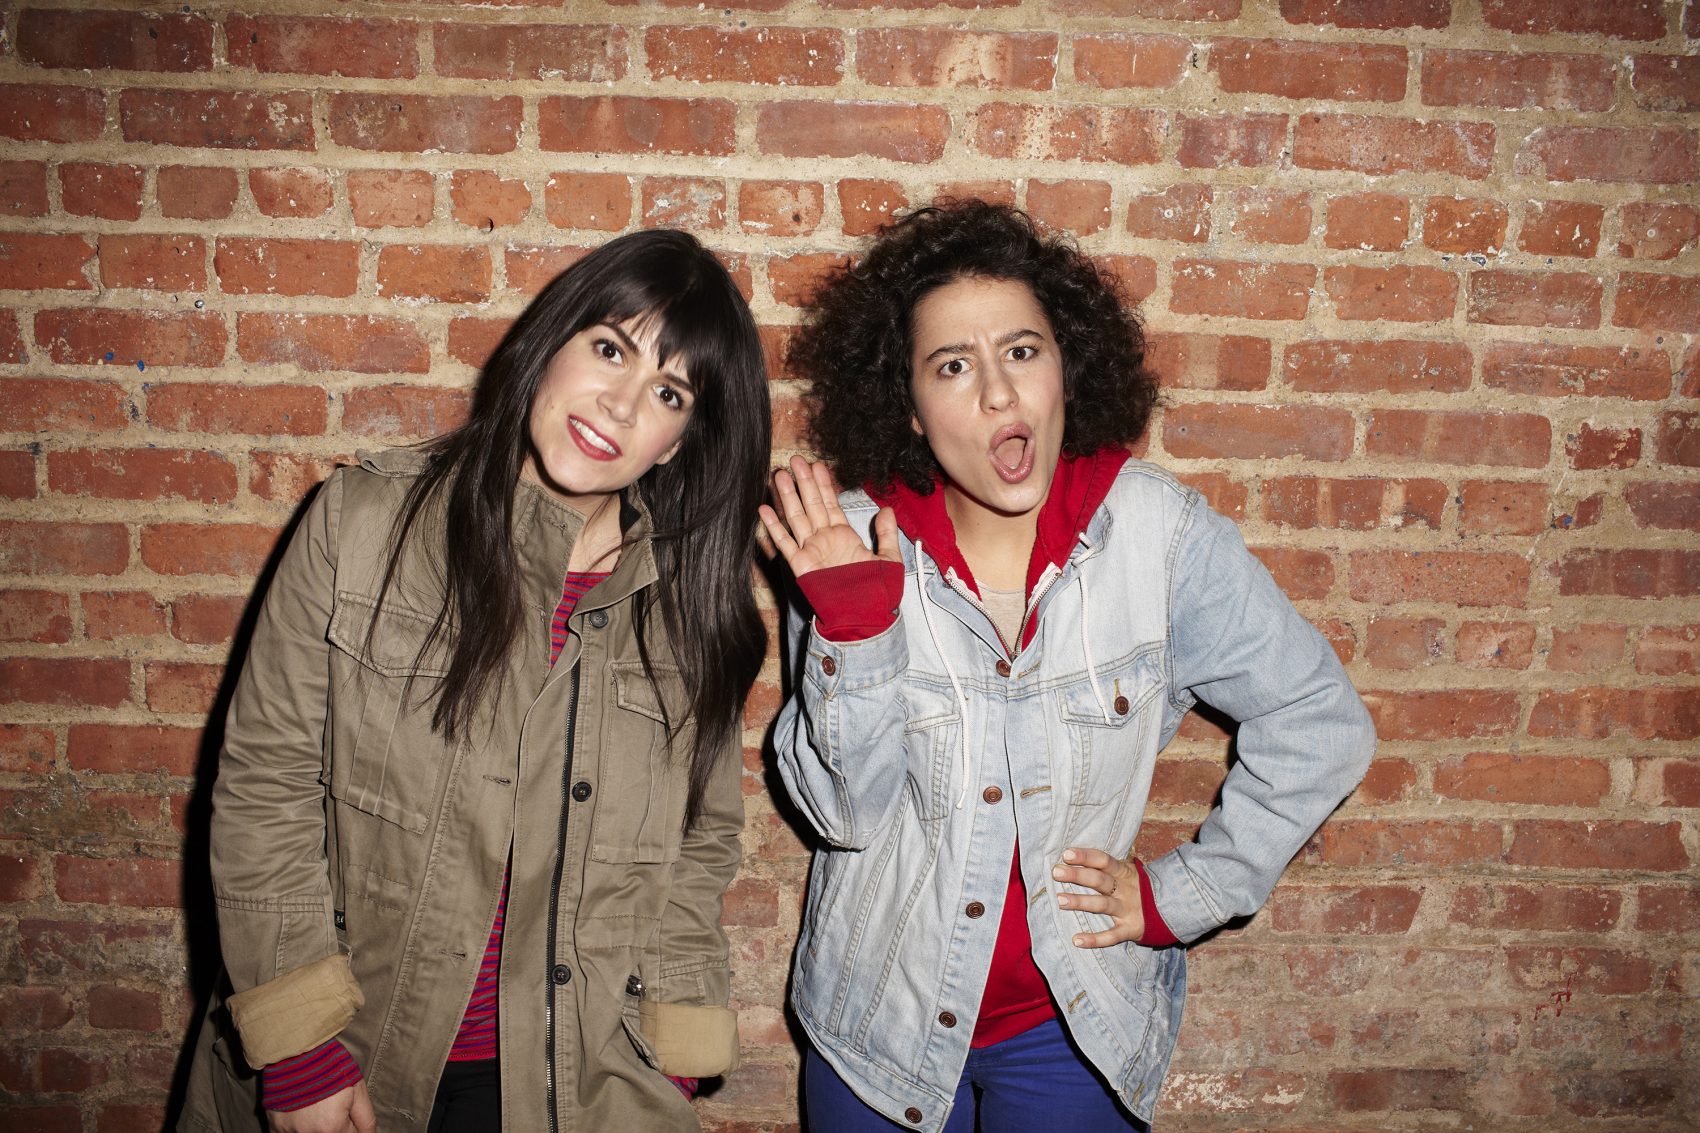 Abbi Jacobson and Ilana Glazer of &quot;Broad City.&quot; (Courtesy of Lane Savage)